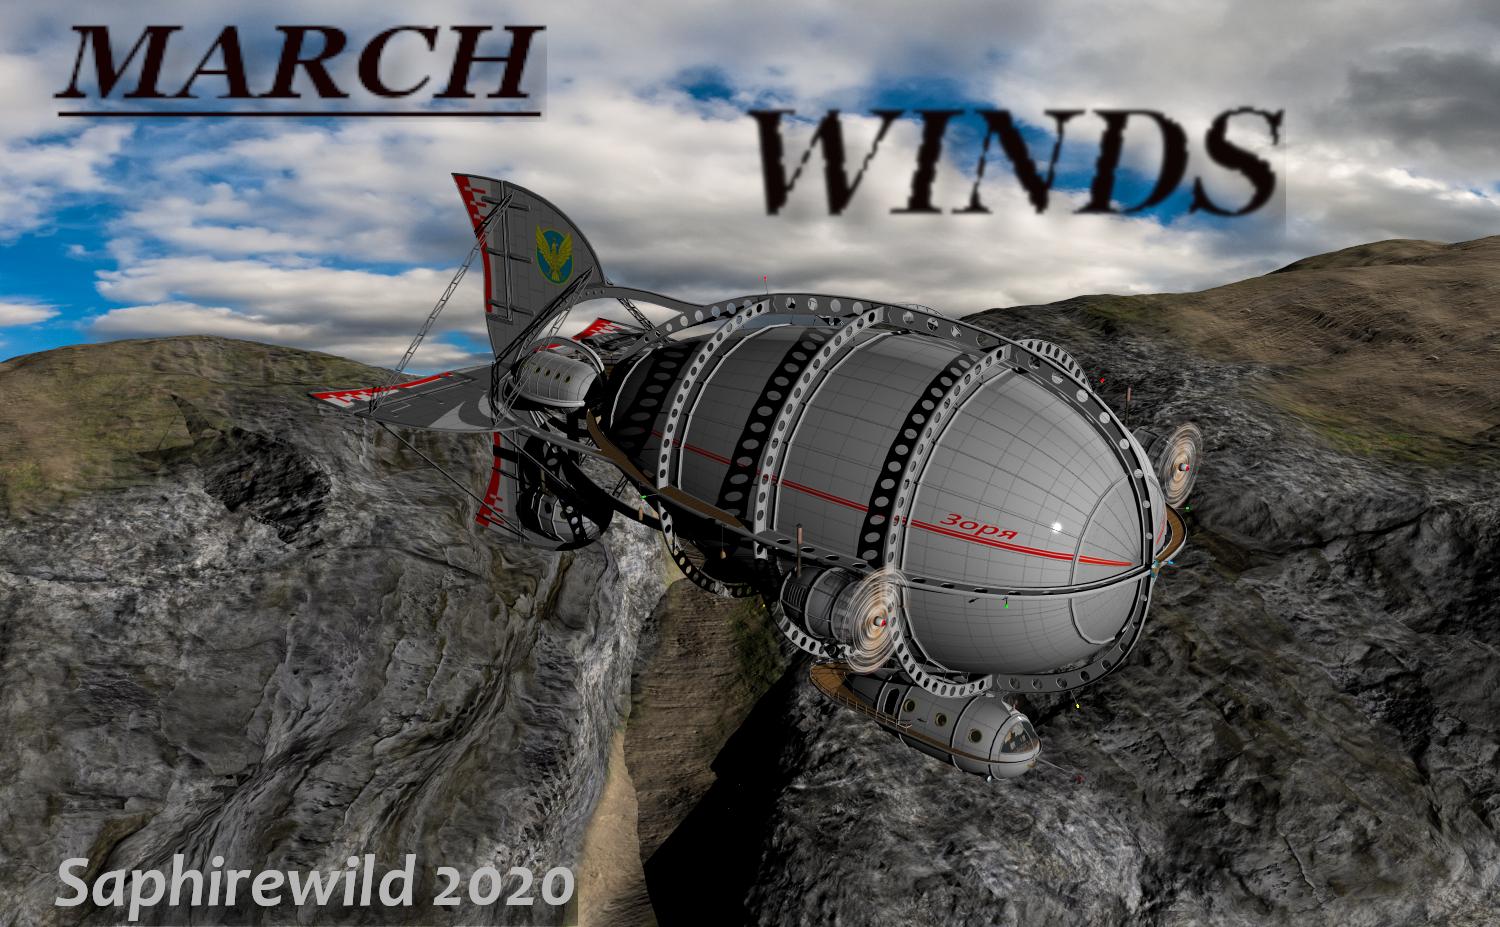 3d Art Freebie Challenge March 2020 Winners Announced March Winds Entries Thread Only Daz